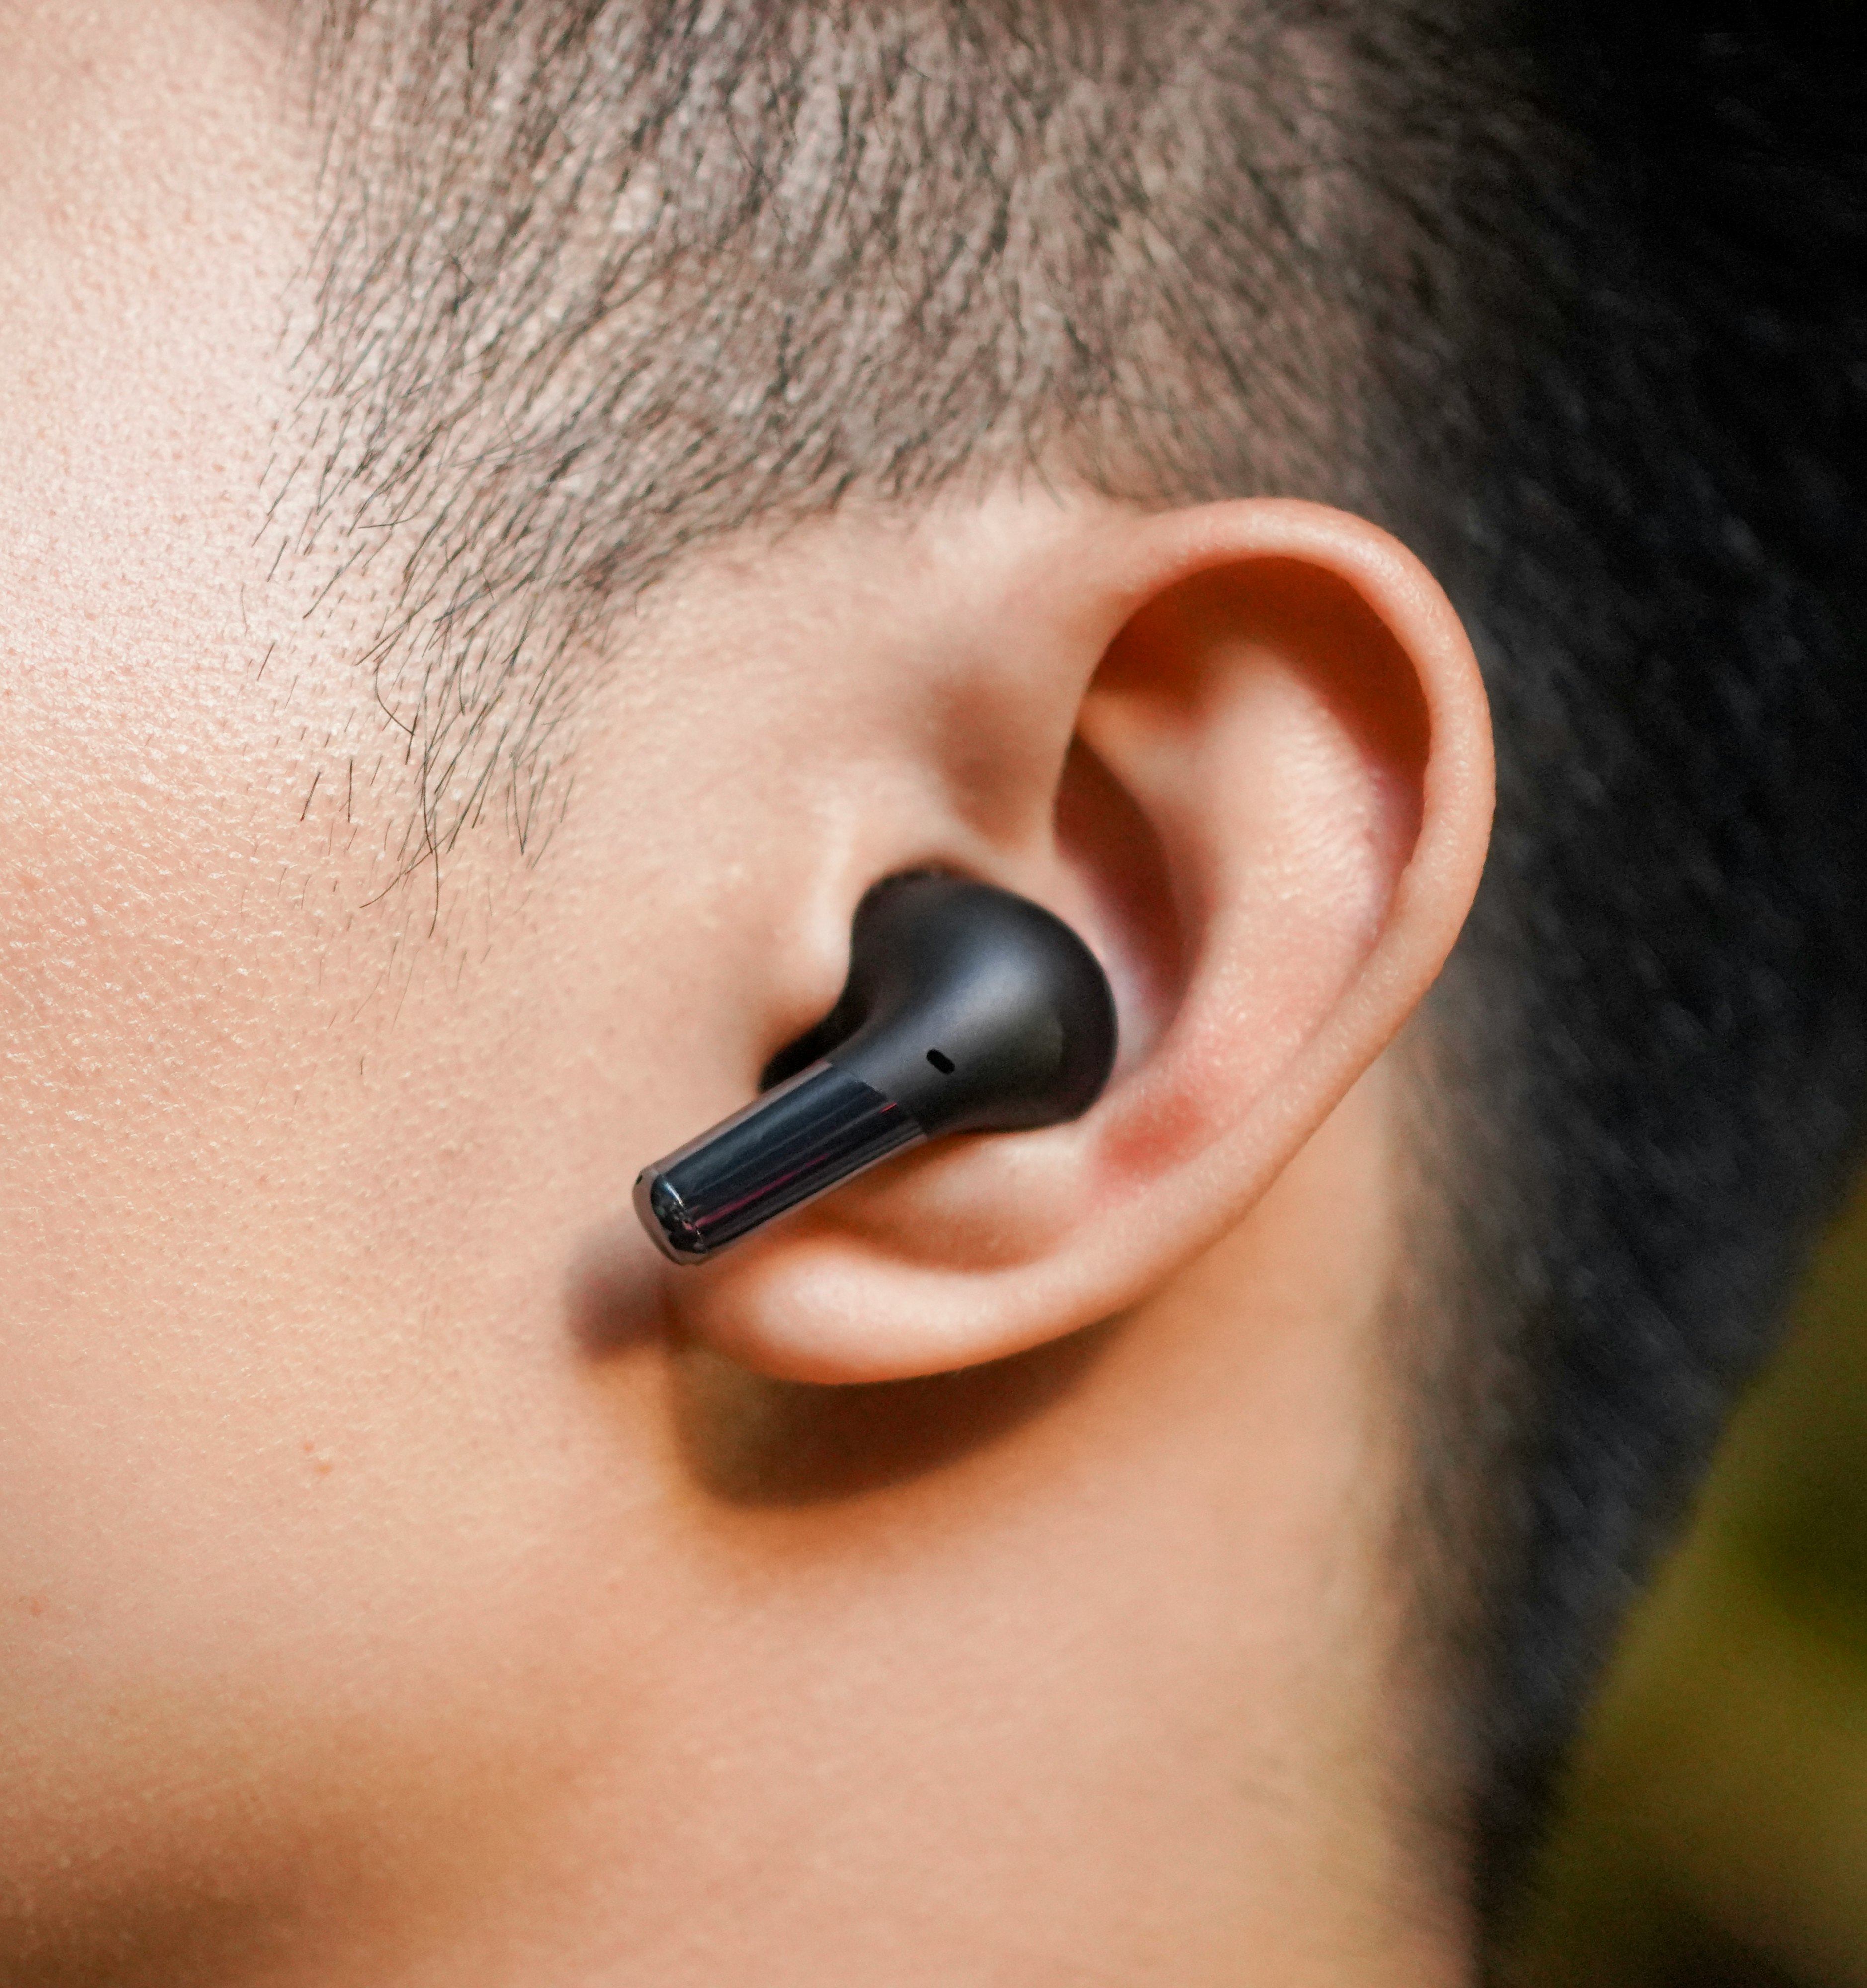 OnePlus Buds Pro review: The comfiest ANC wireless earbuds I've ever used